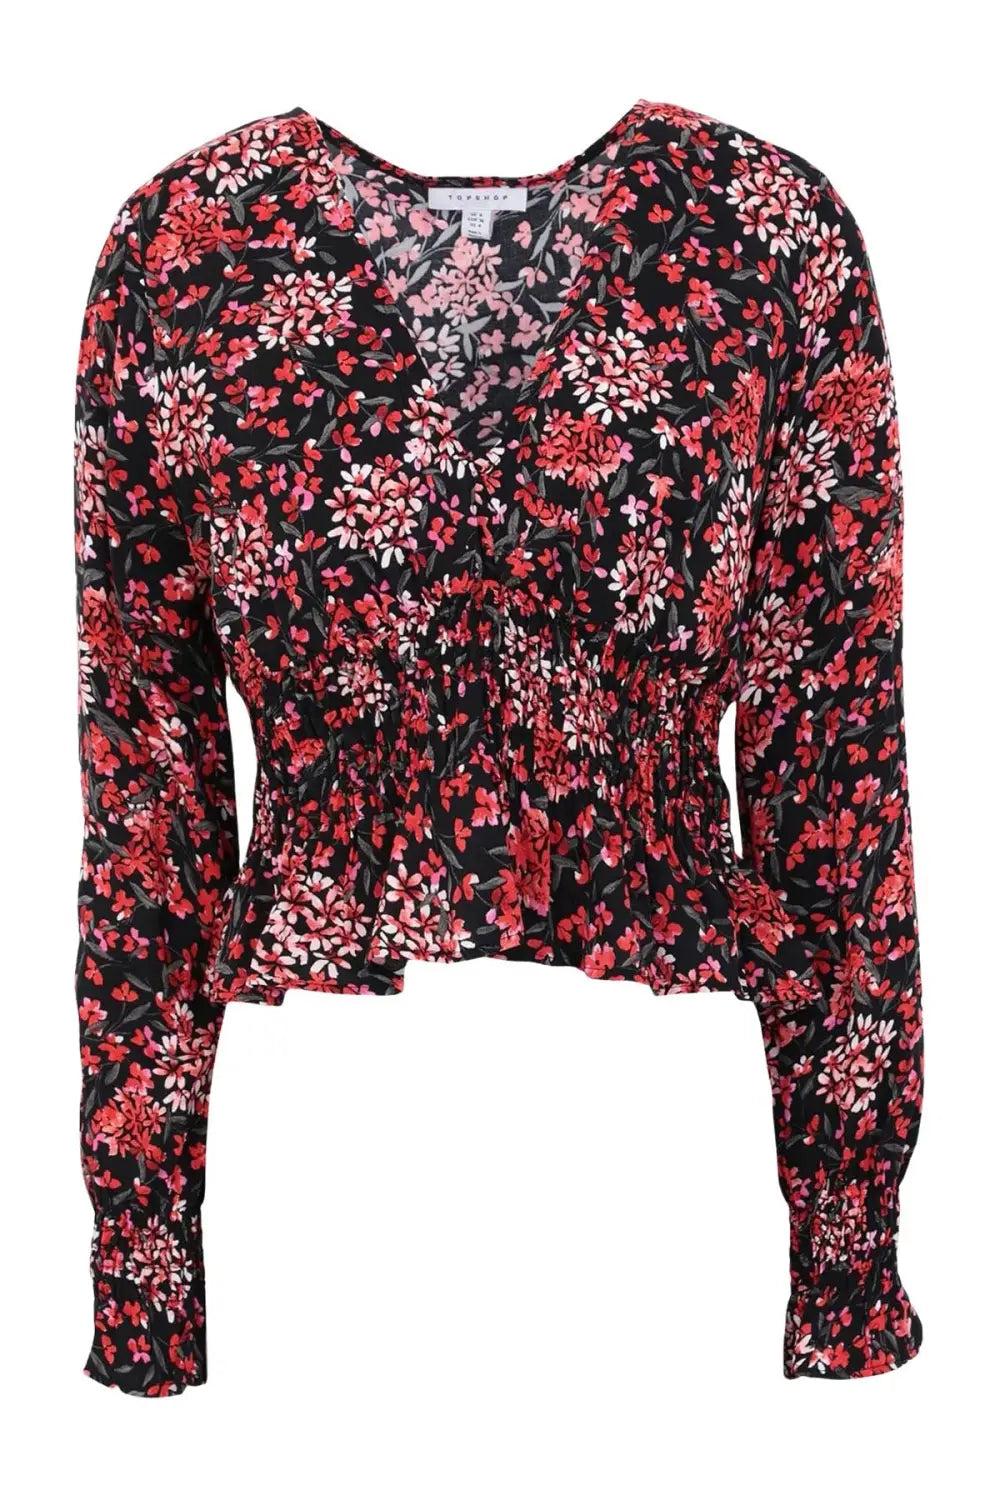 Topshop Long Sleeve Ruched Crop Blouse